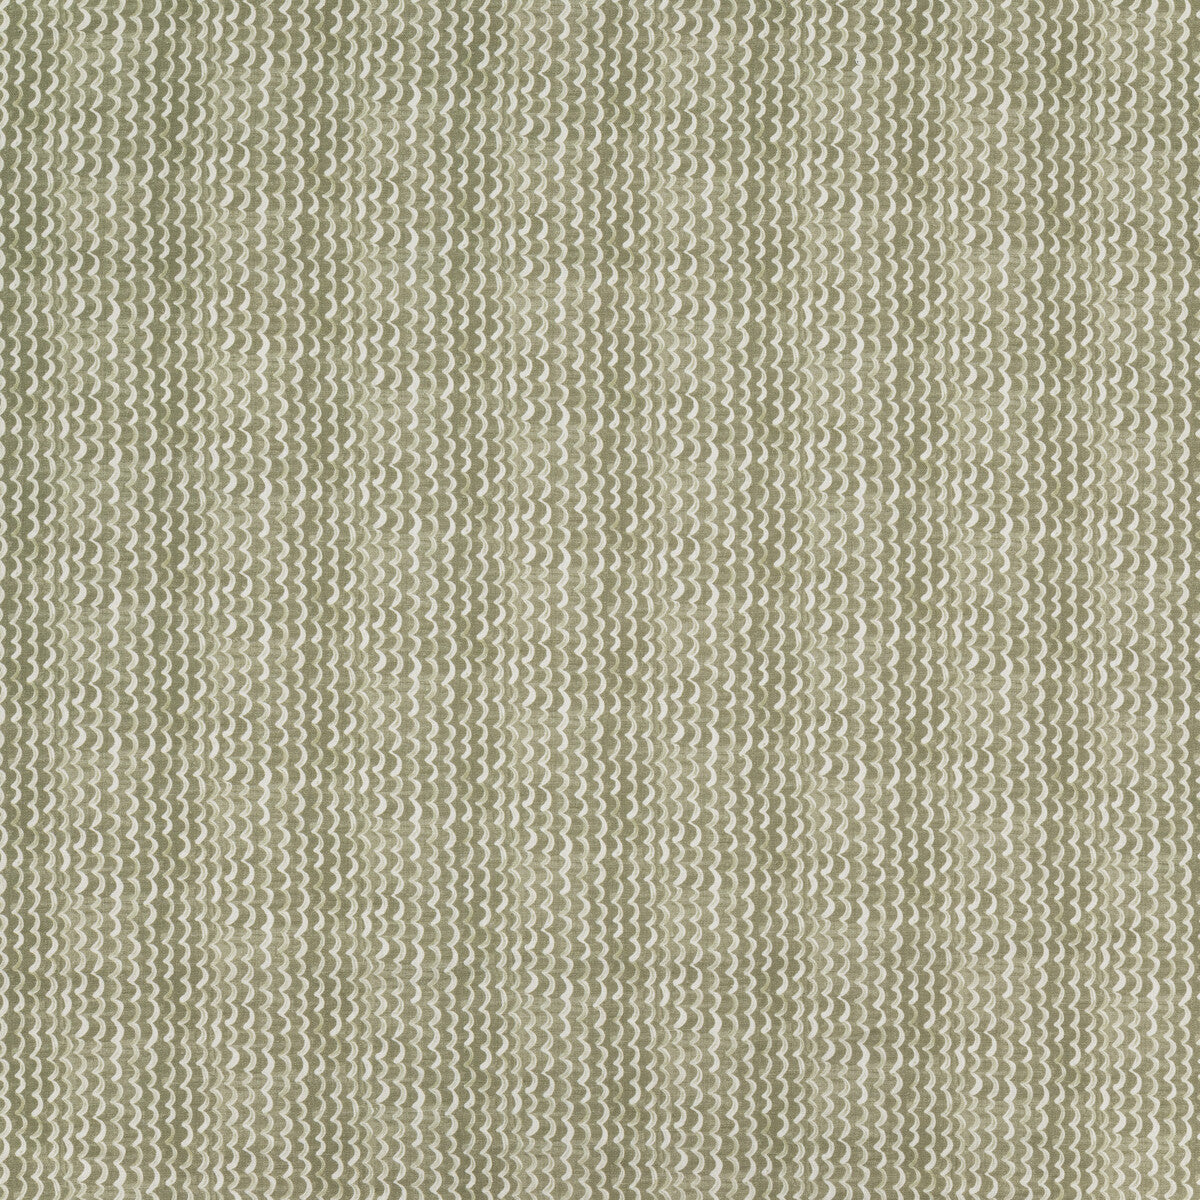 Camden fabric in sage color - pattern BFC-3704.130.0 - by Lee Jofa in the Blithfield Eden collection